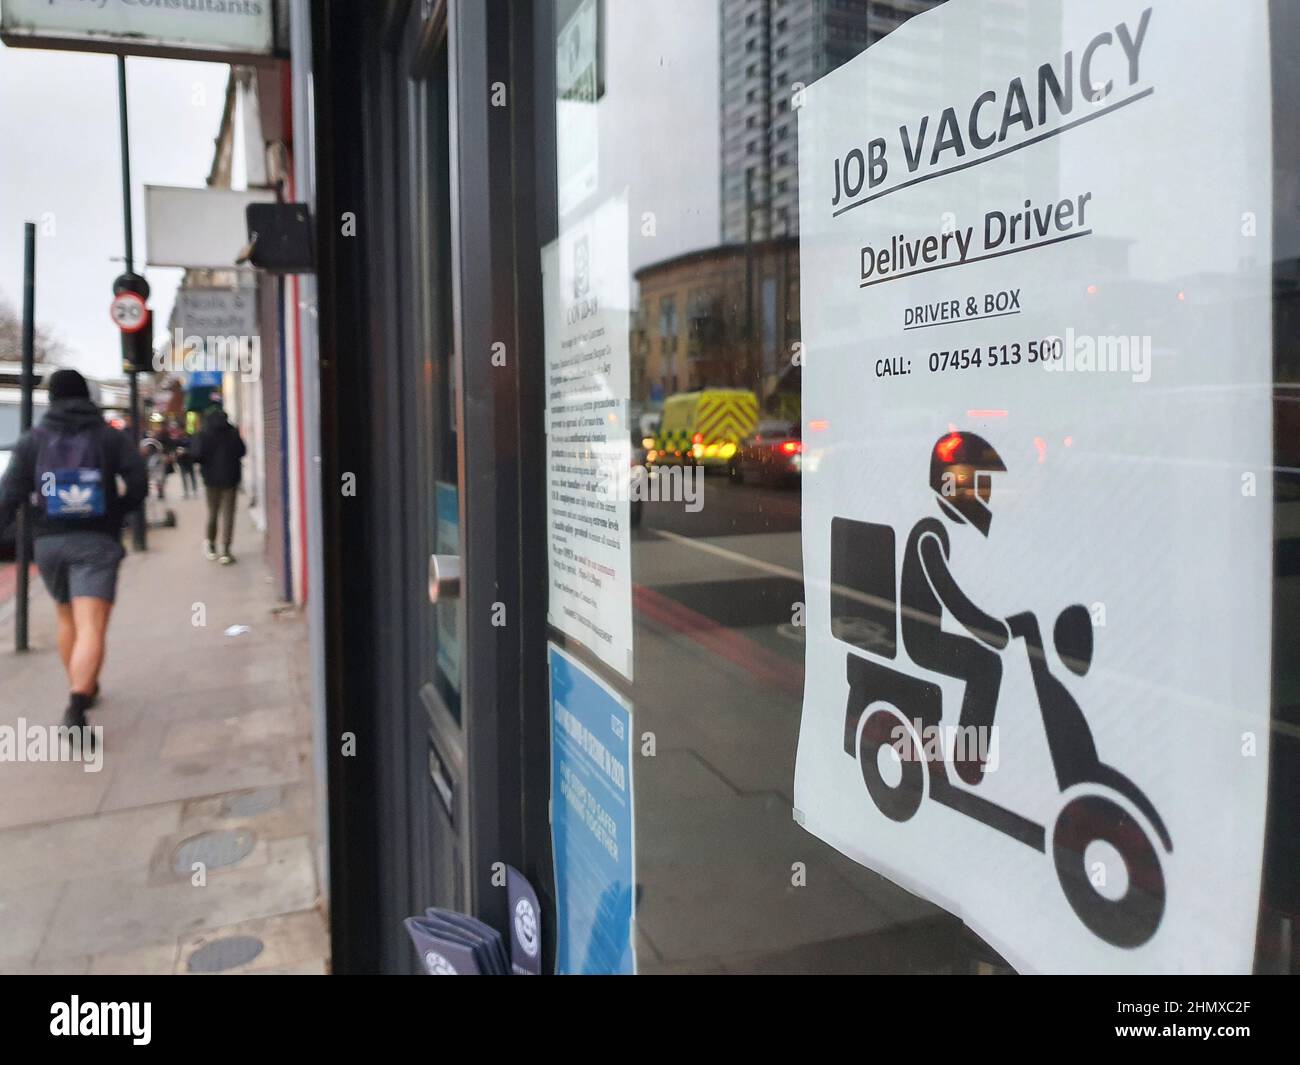 London, UK, 7 February 2022: a take-away food restaurant in Battersea has a sign in the door advertising a job vacancy for a delivery driver. Anna Wat Stock Photo